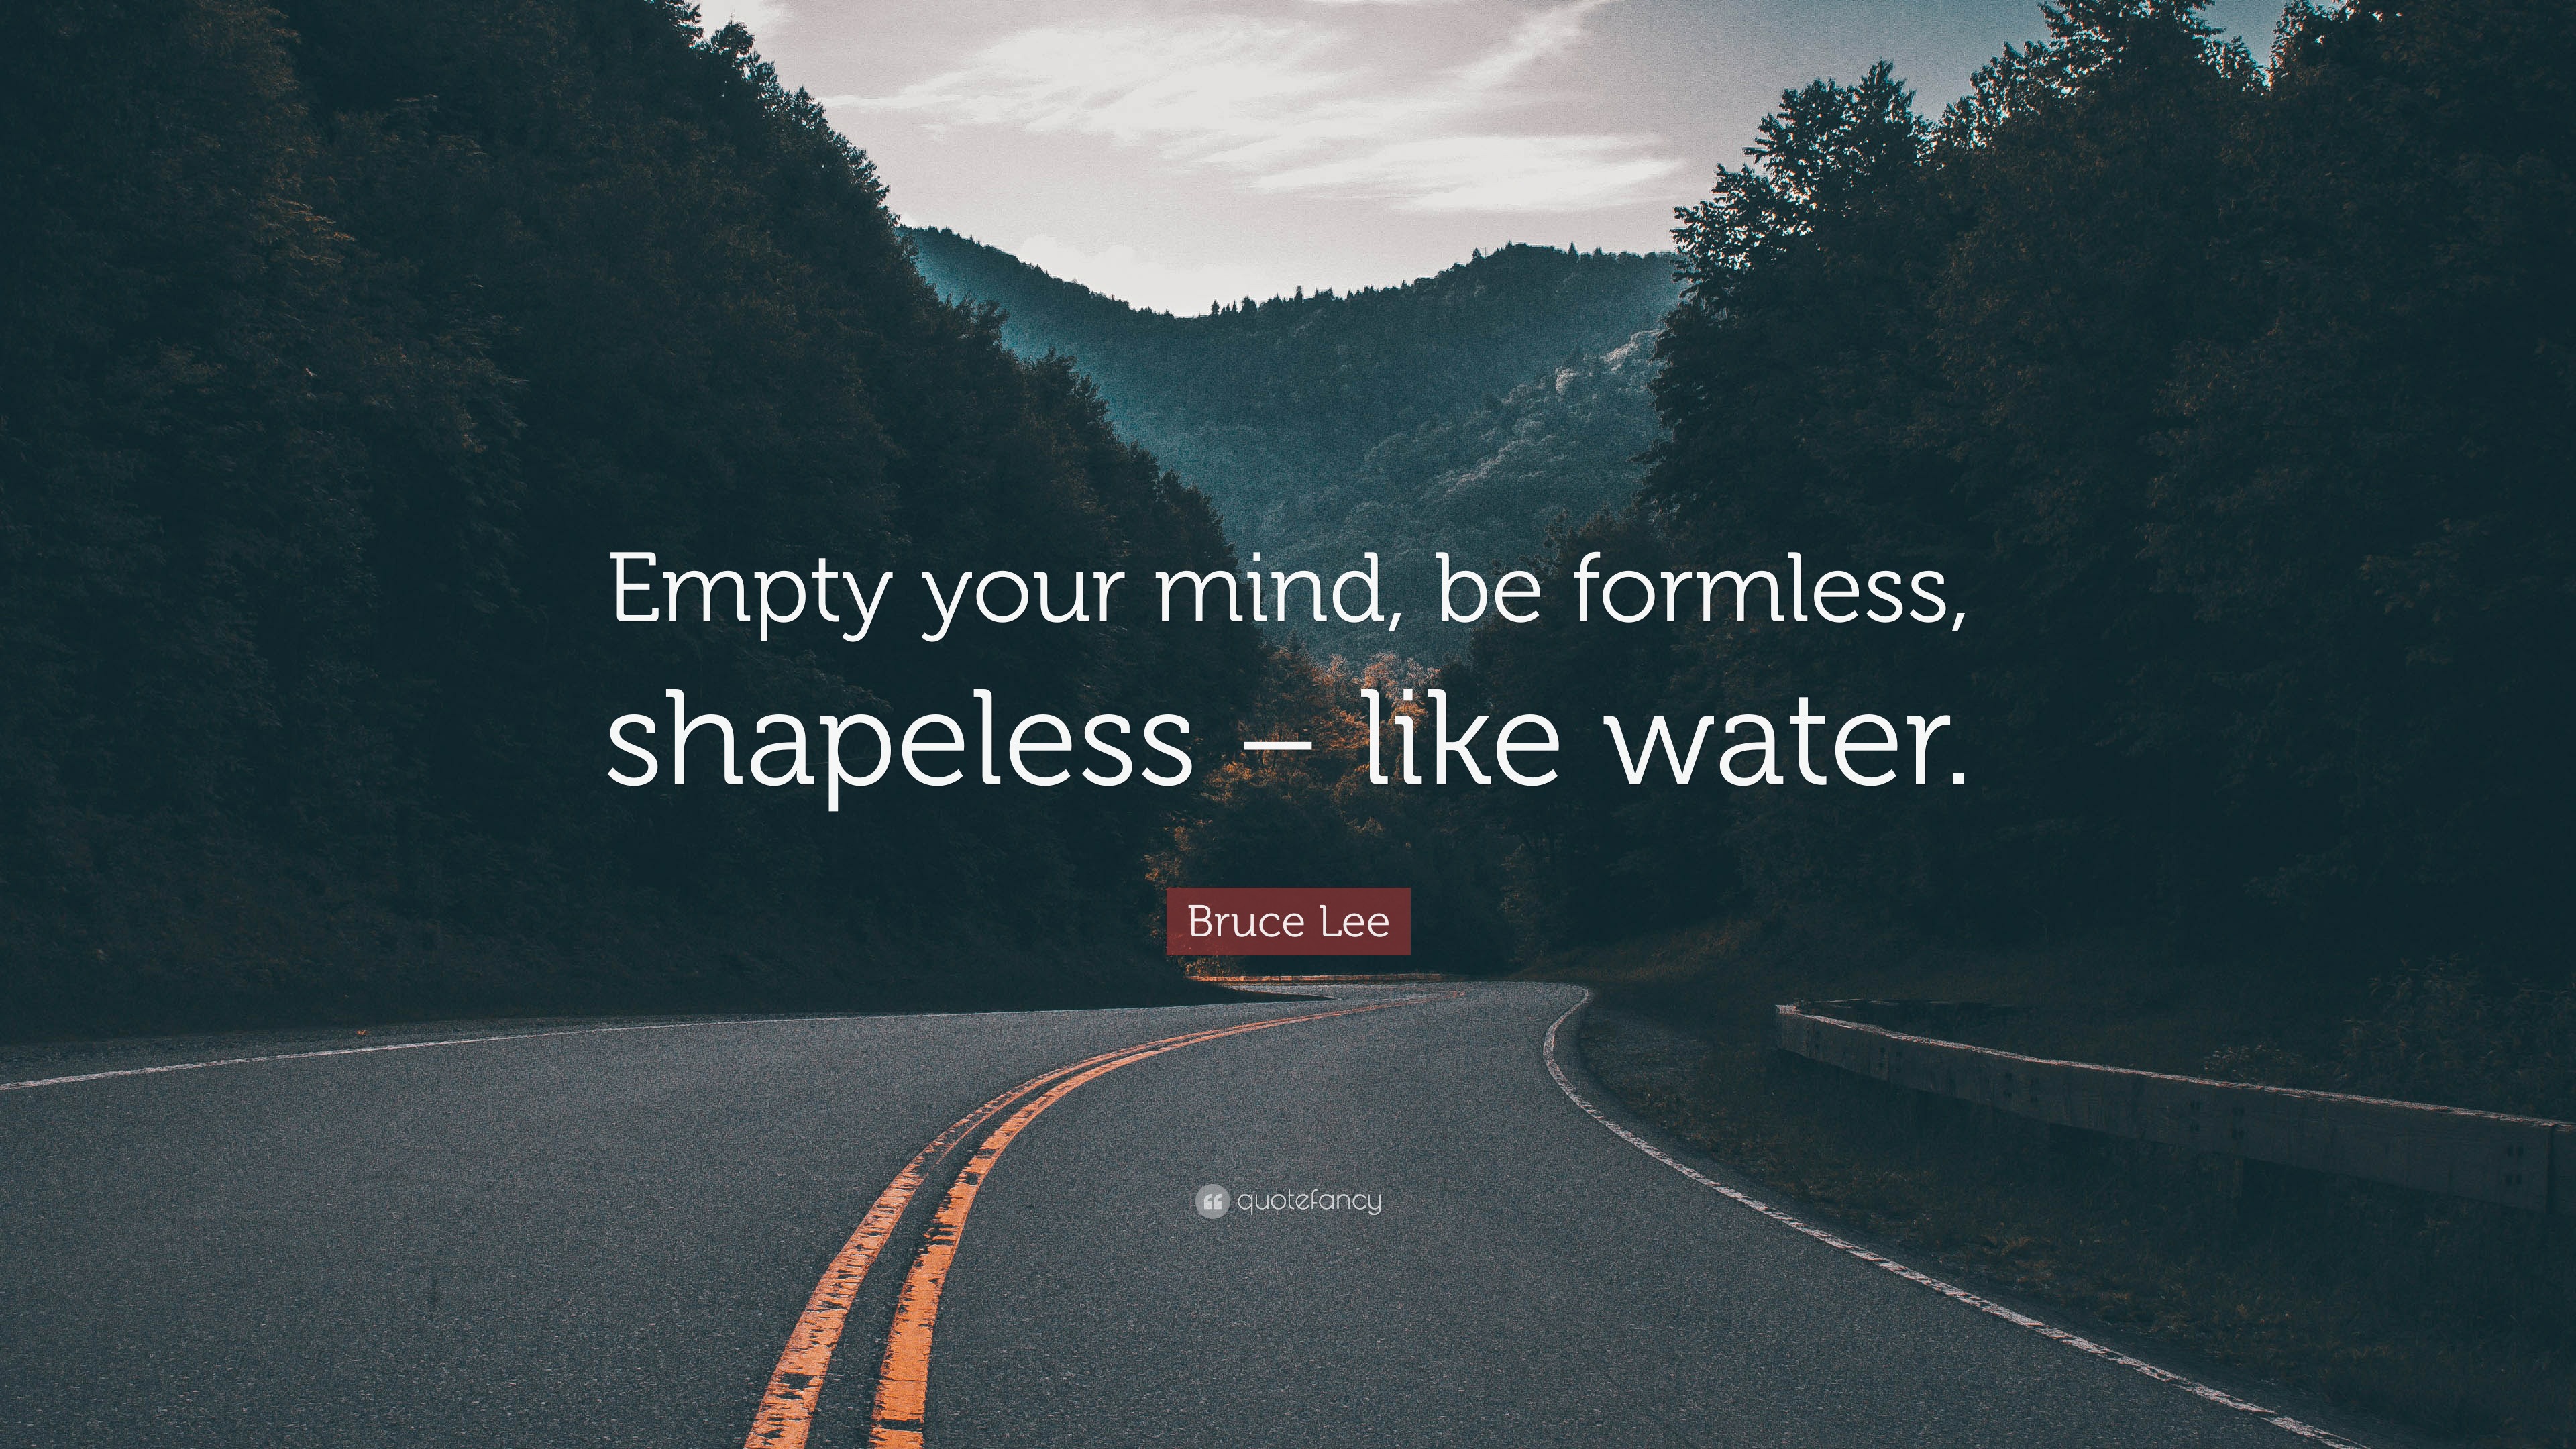 Bruce Lee Quote: "Empty your mind, be formless, shapeless - like water...